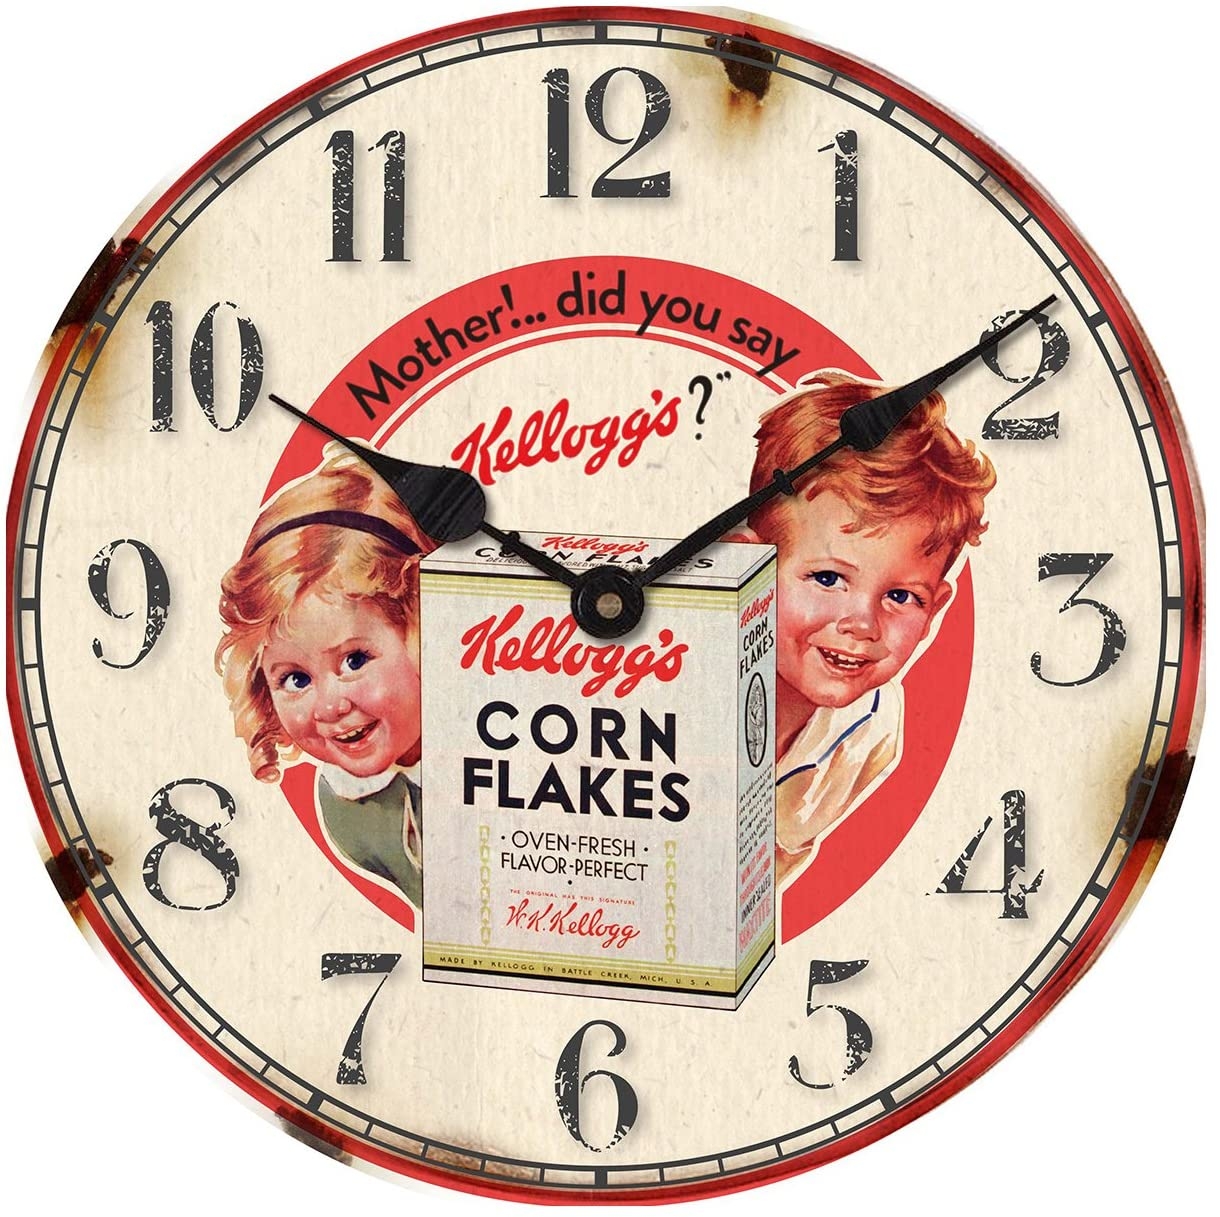 Wall Clock by Kelloggs - Vintage - Retro - Cornflakes Boy and Girl Image Antique Style - In Stock and comes with AMAZON 30days 100% MONEY BACK GUARANTEE